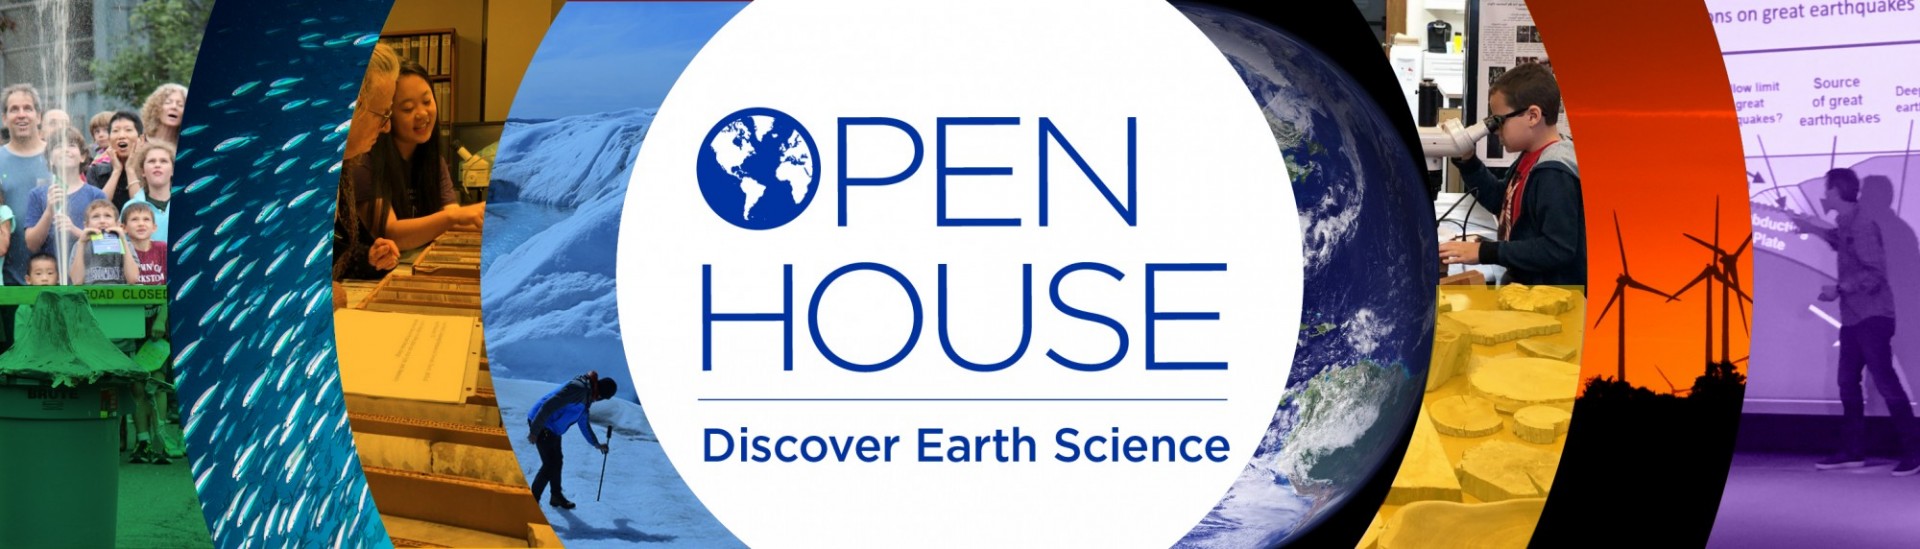 Open House: Discover Earth Science